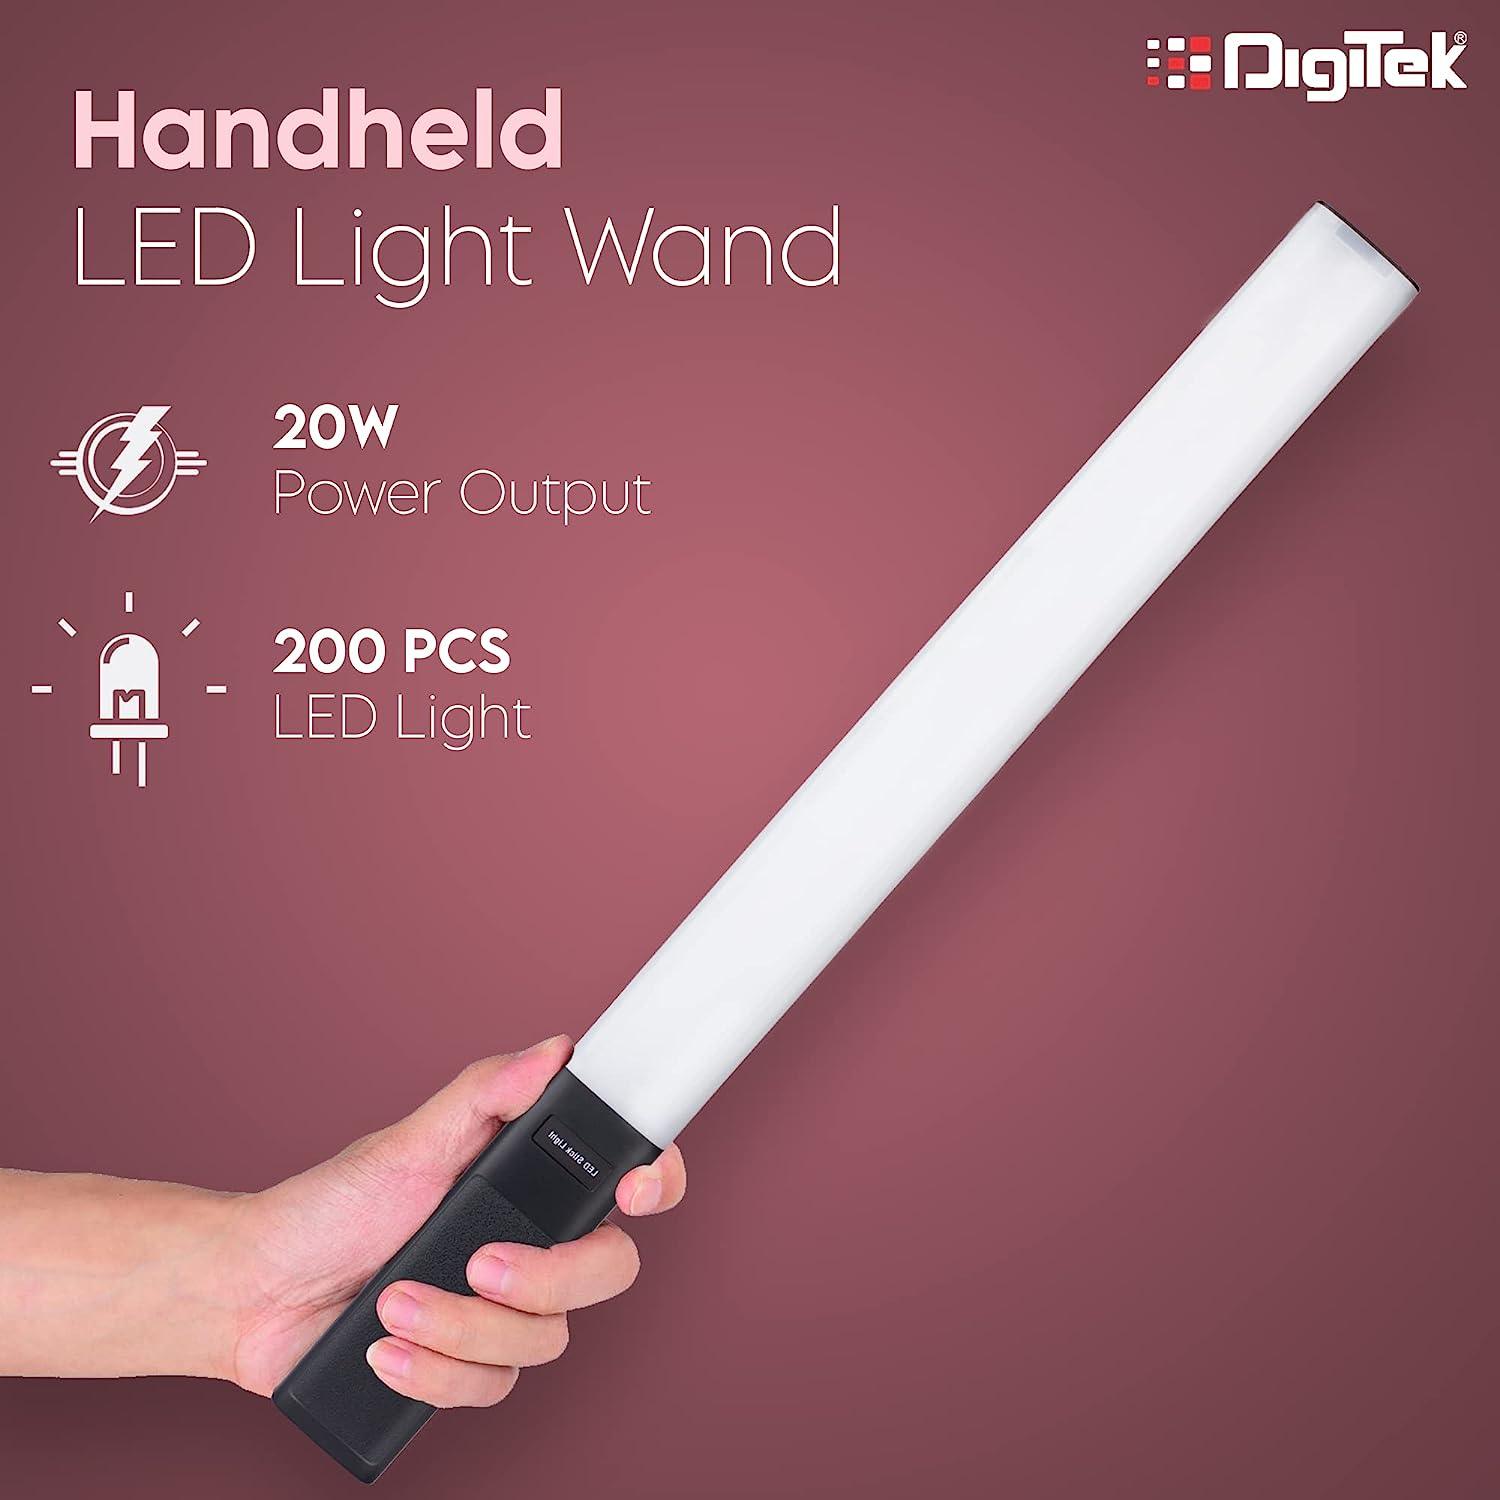 Digitek (DSL-20W) Portable Handheld LED Stick Light Wand with Remote for YouTube, Photo-Shoot, Video Shoot, Live Stream, Makeup & More, Compatible with iPhone/ Android Phones & Cameras. - Digitek